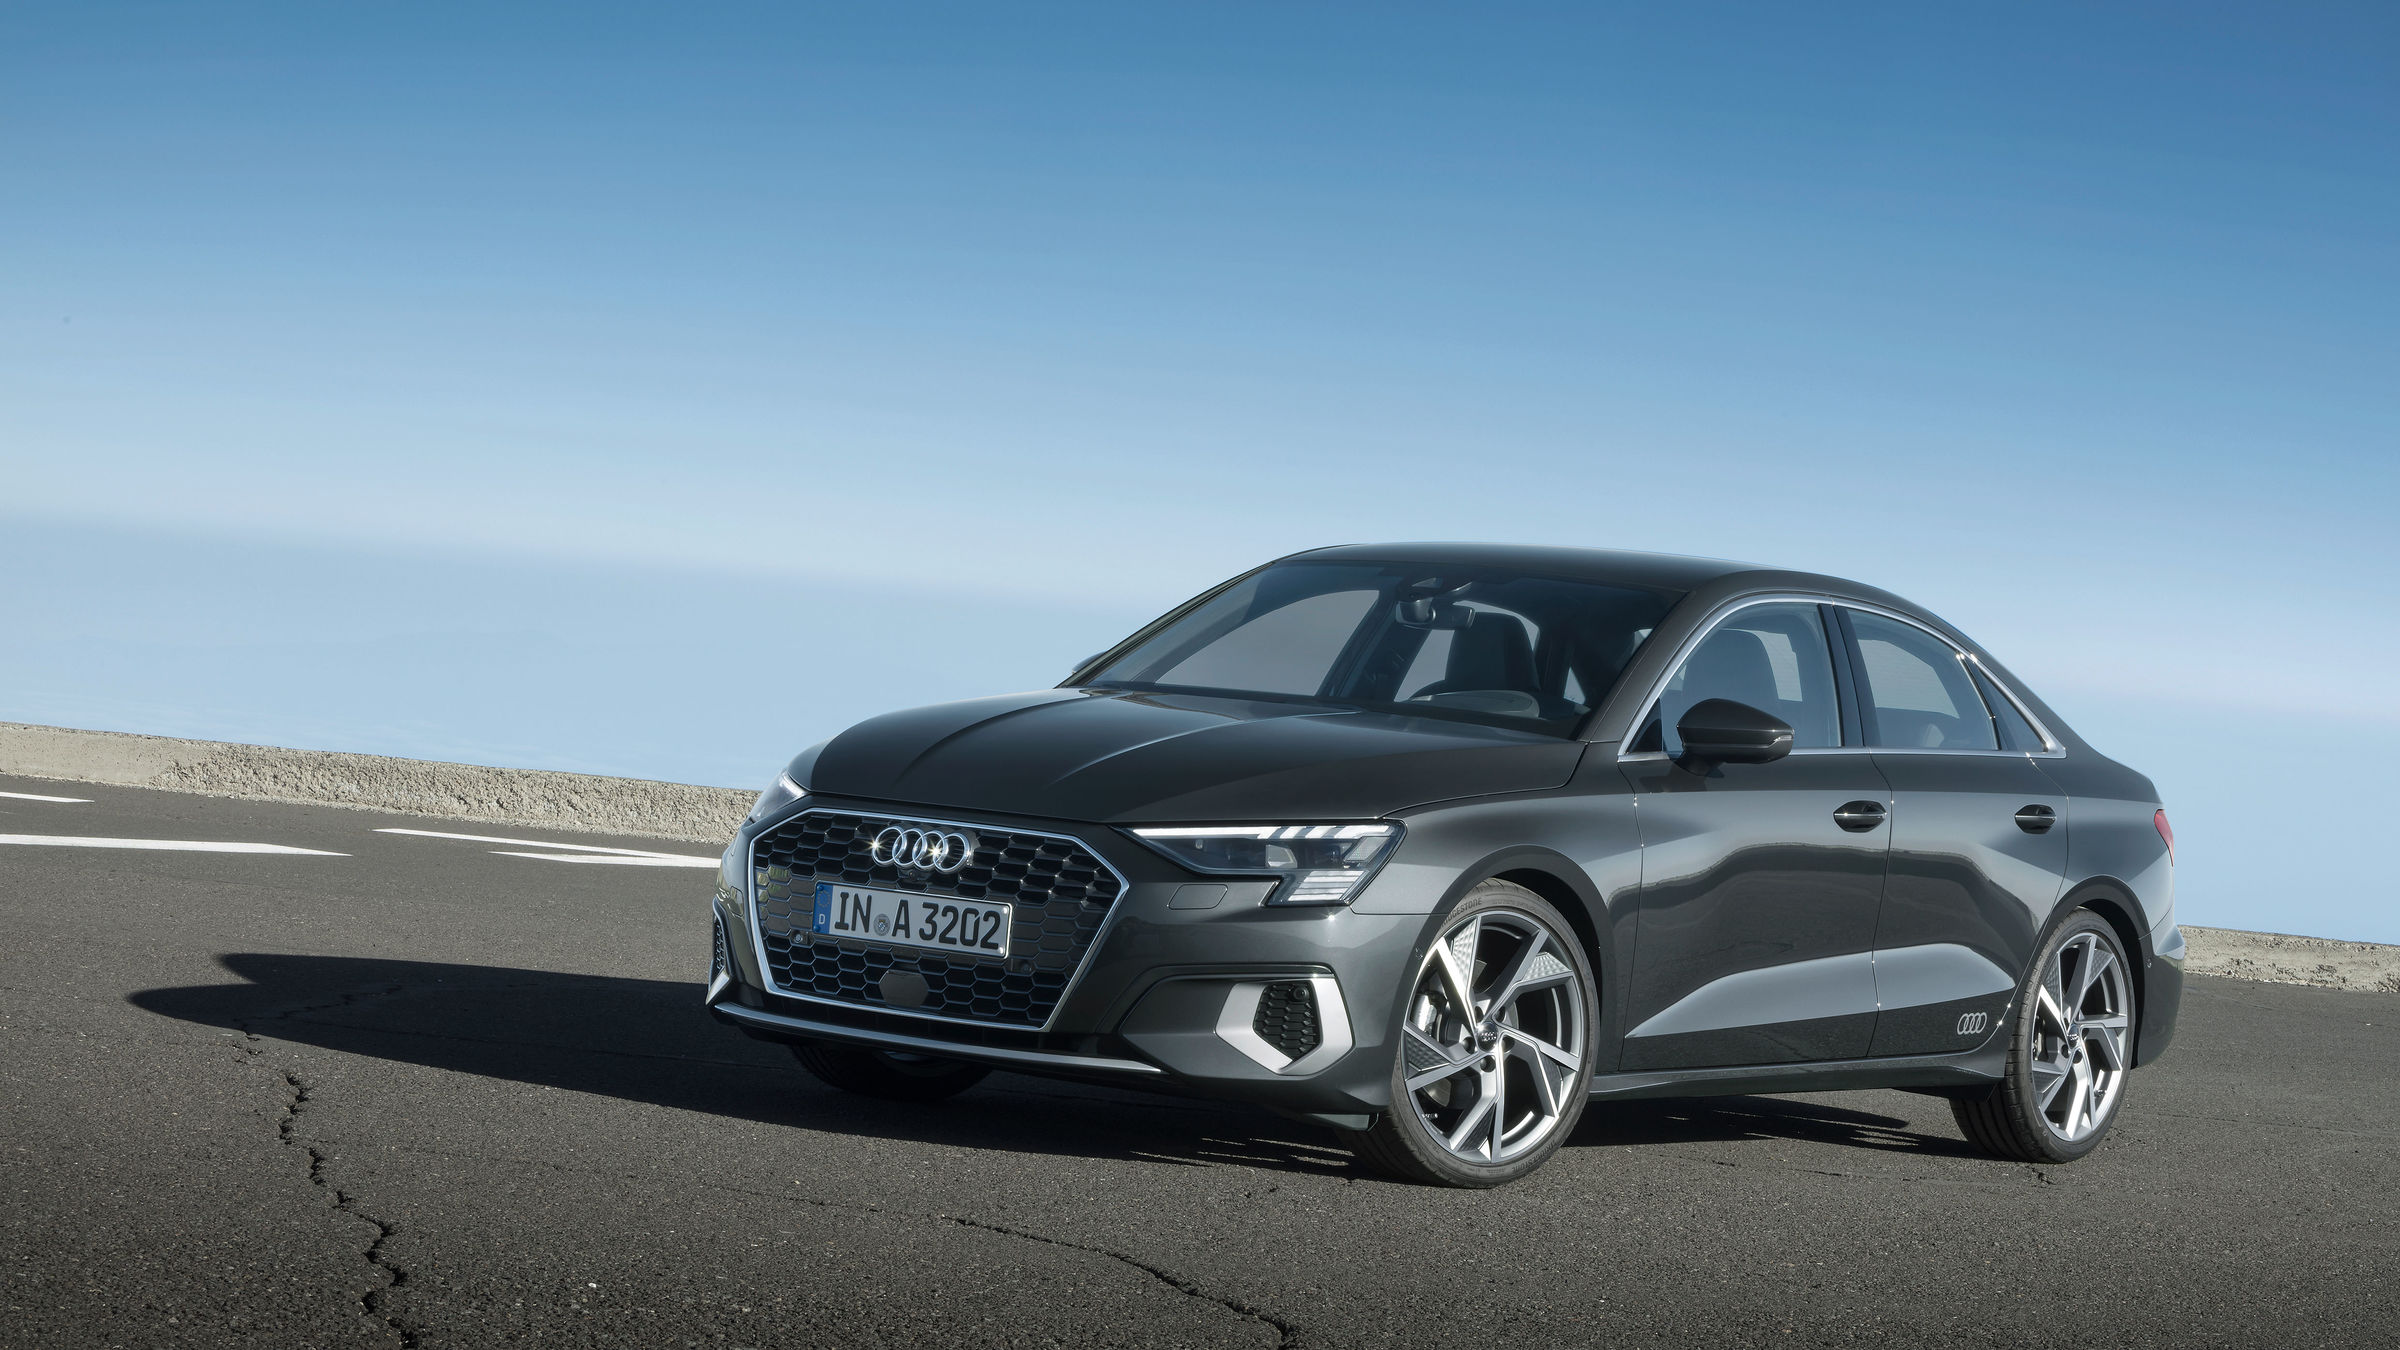 Audi Abu Dhabi and Al Ain Welcome The All-New A3, S3 And S3 Sportback